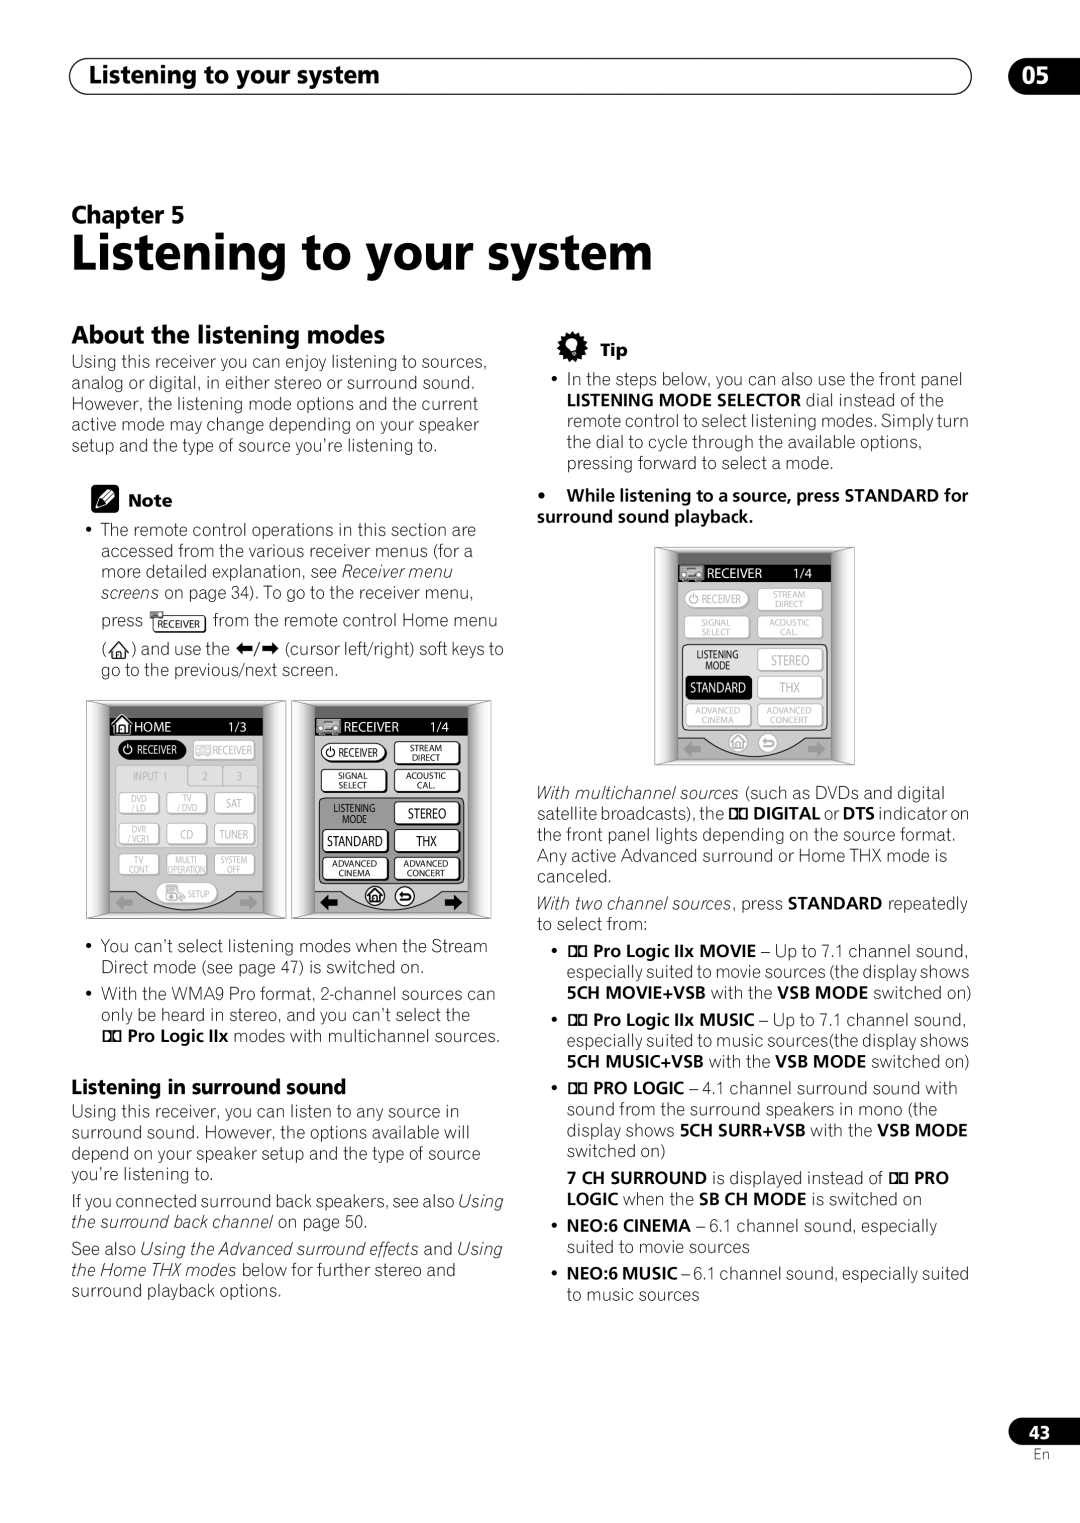 Pioneer VSX-59TXi Listening to your system, Chapter, About the listening modes, Listening in surround sound 